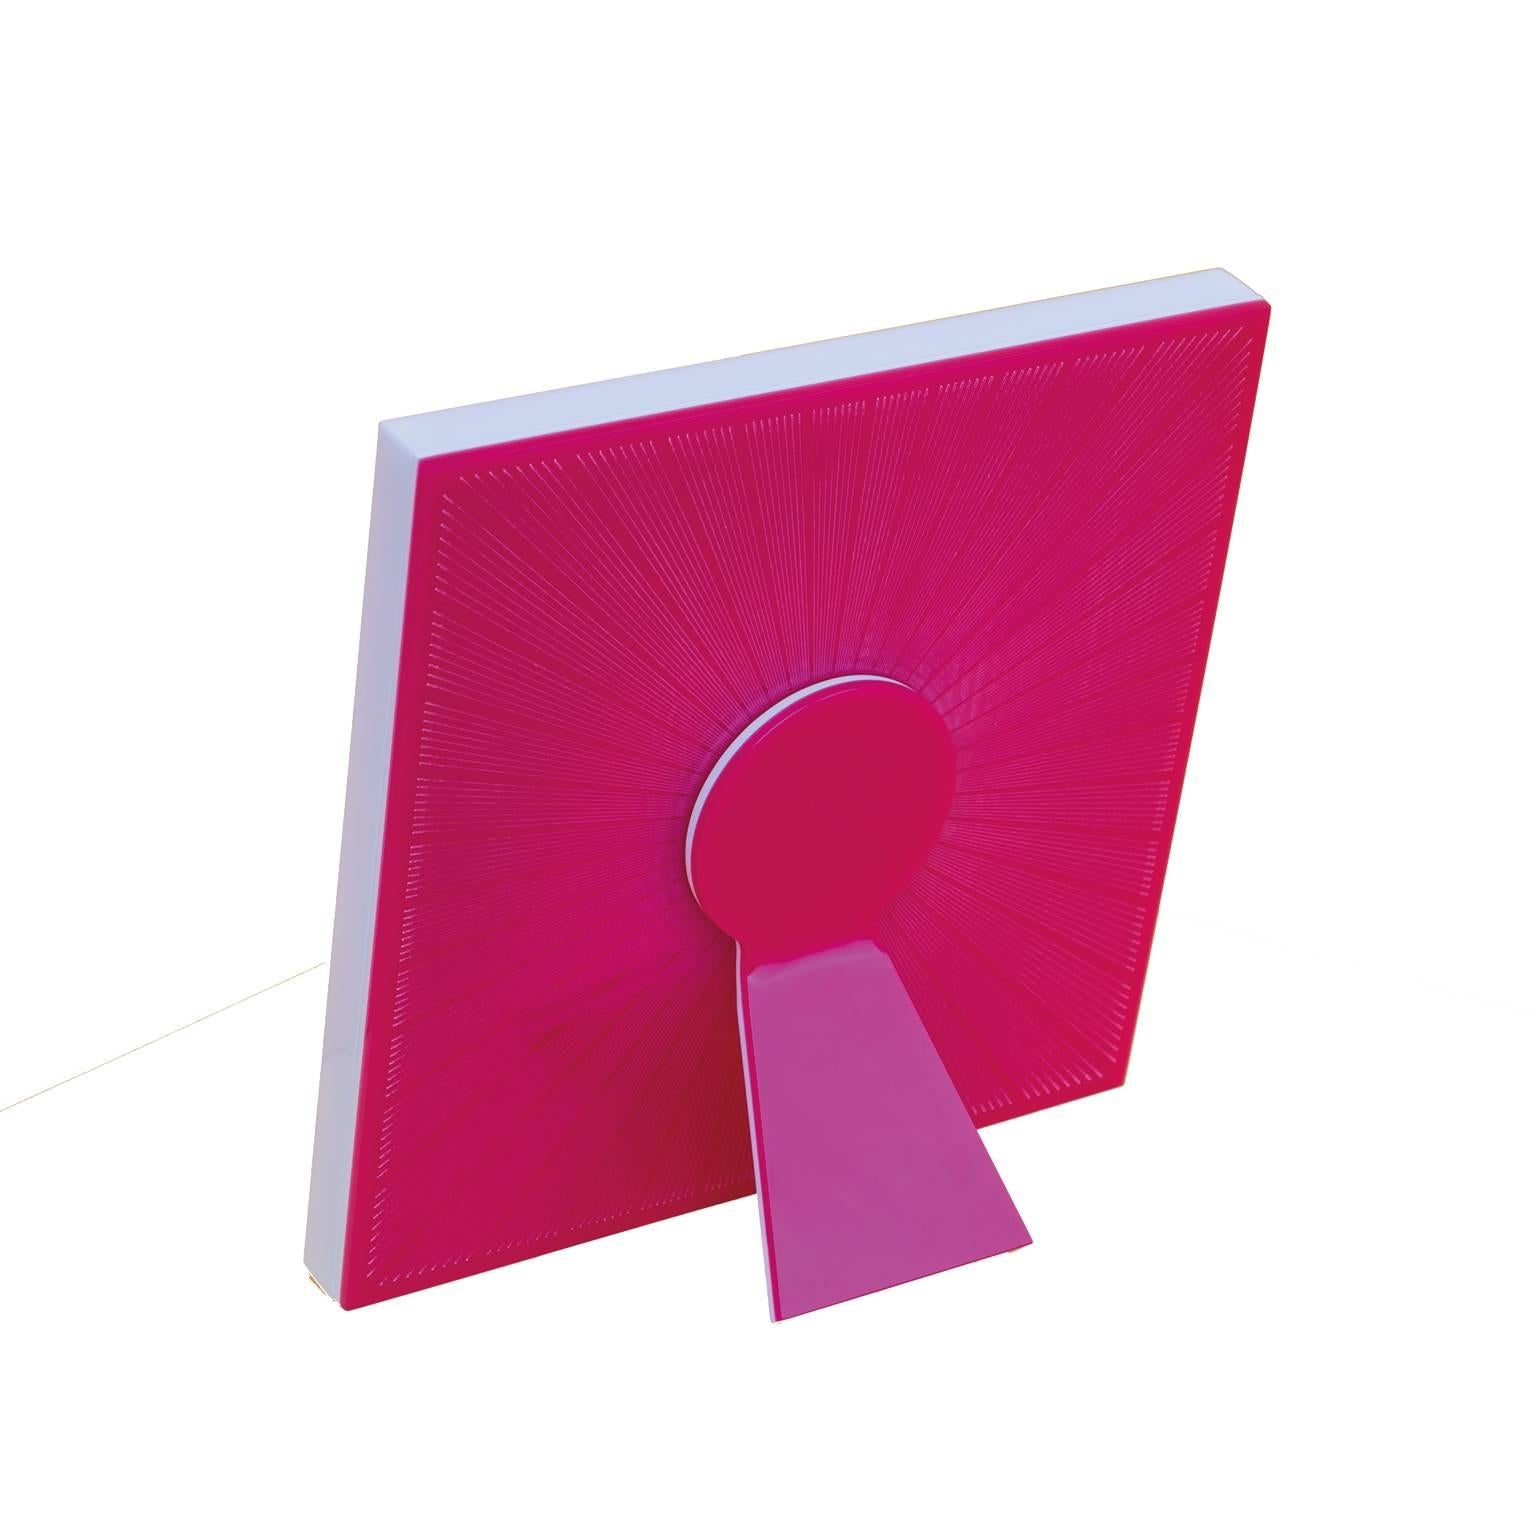 Sharing Shocking Pink  is a limited edition of Art with Heart collection of recto-verso photo frames by Laura G Italy. It is realized in shocking pink  and white artistic plexiglass , with guillochè rays hand worked into shocking pink flou plexi,